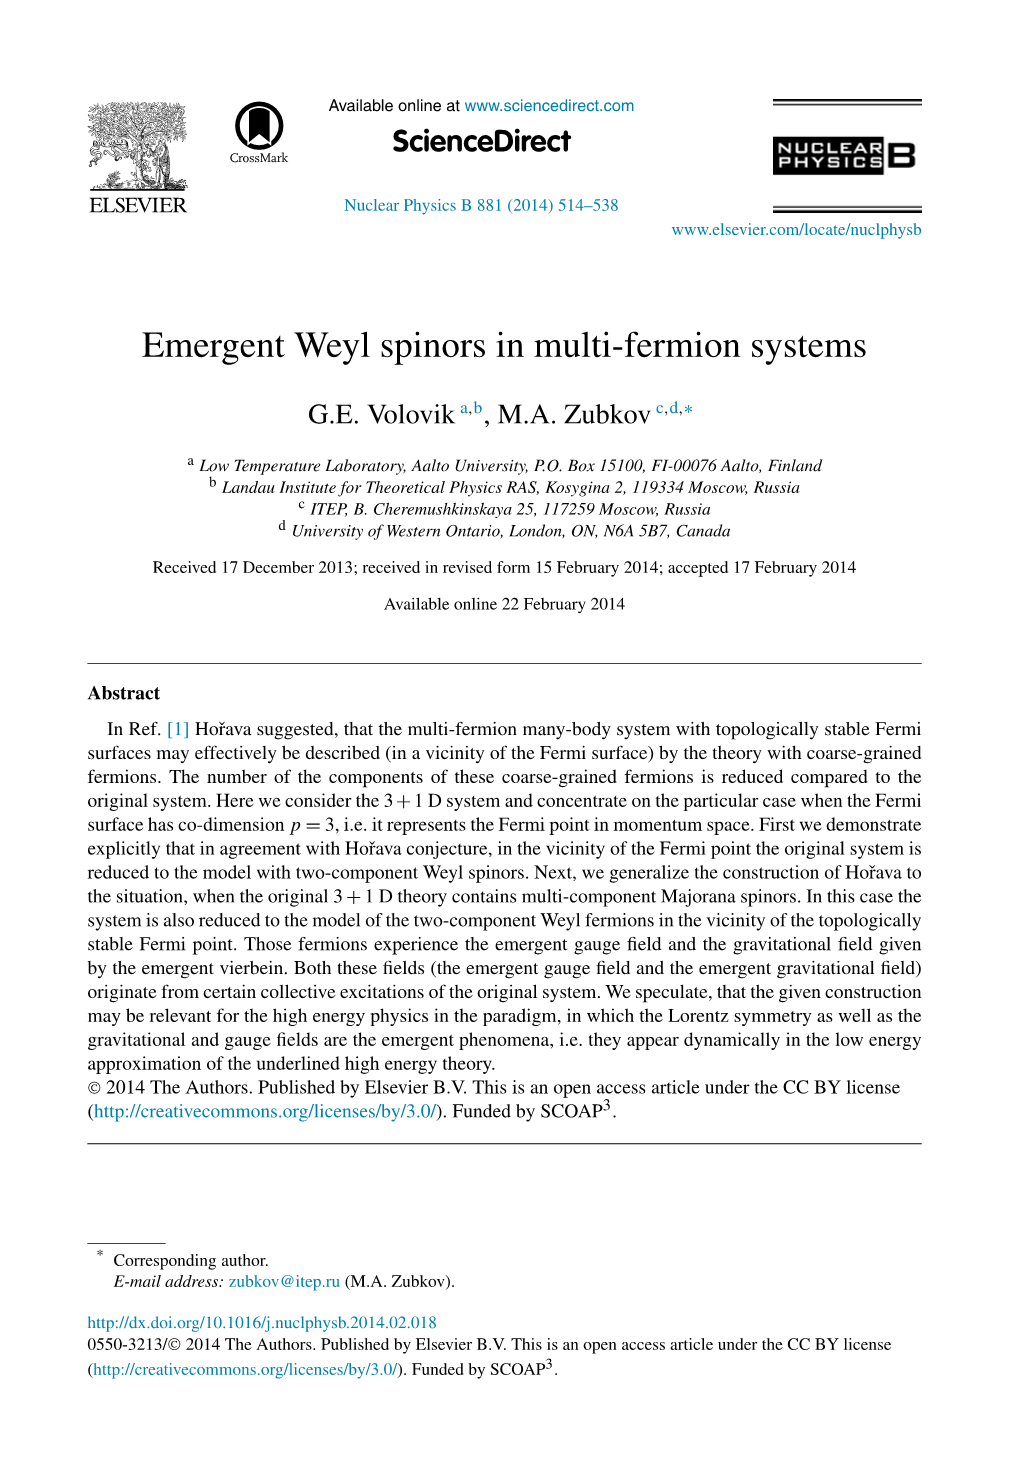 Emergent Weyl Spinors in Multi-Fermion Systems